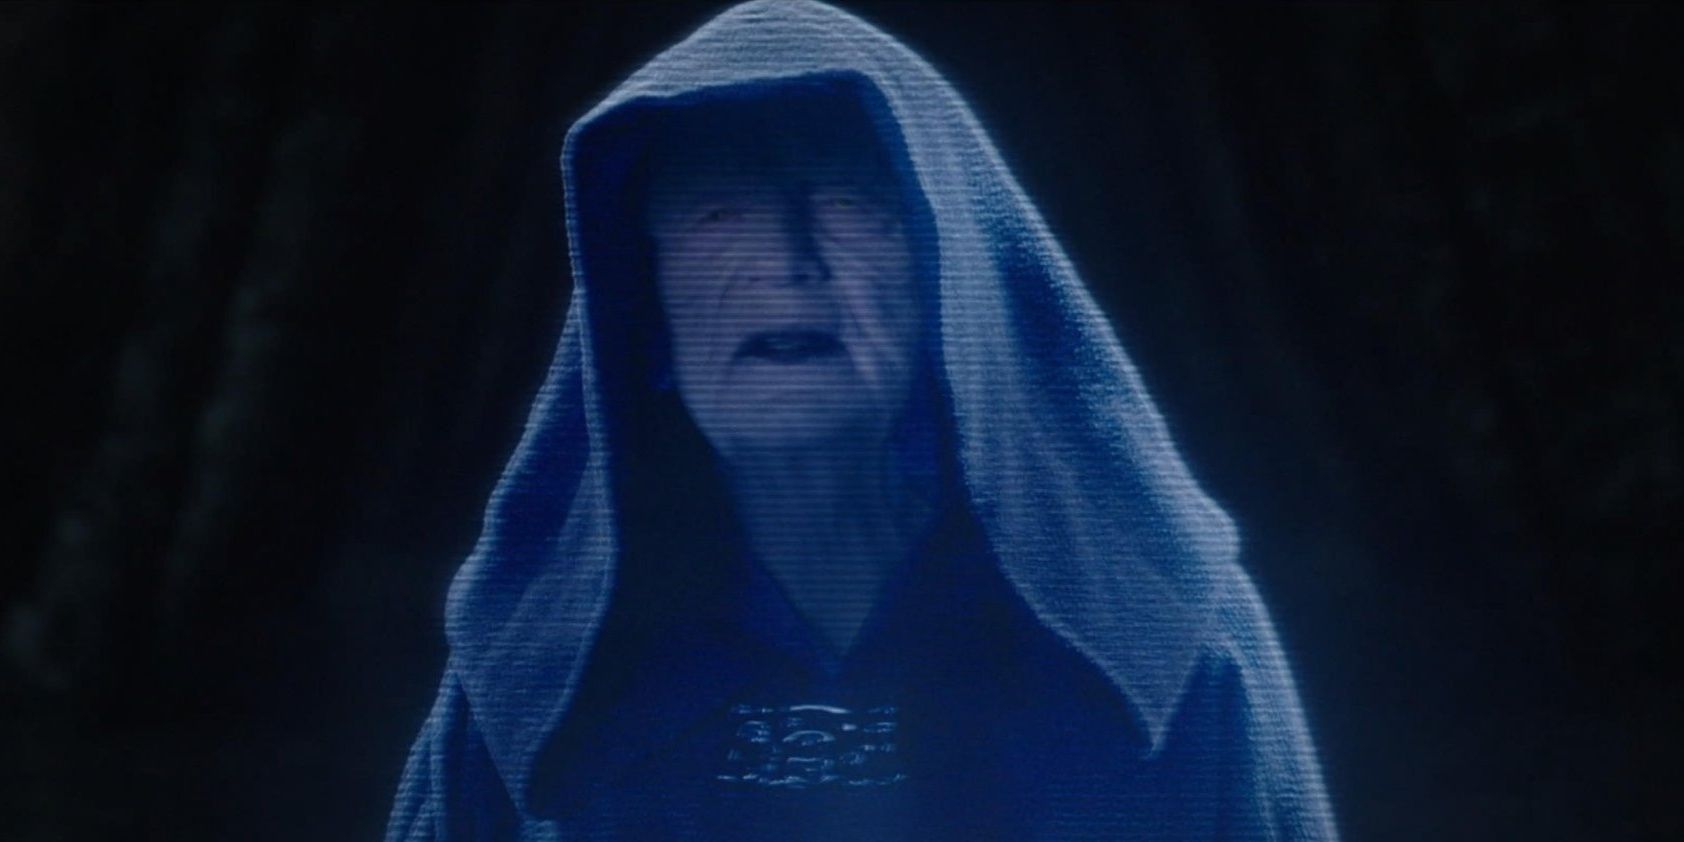 emperor palpatine as a hologram